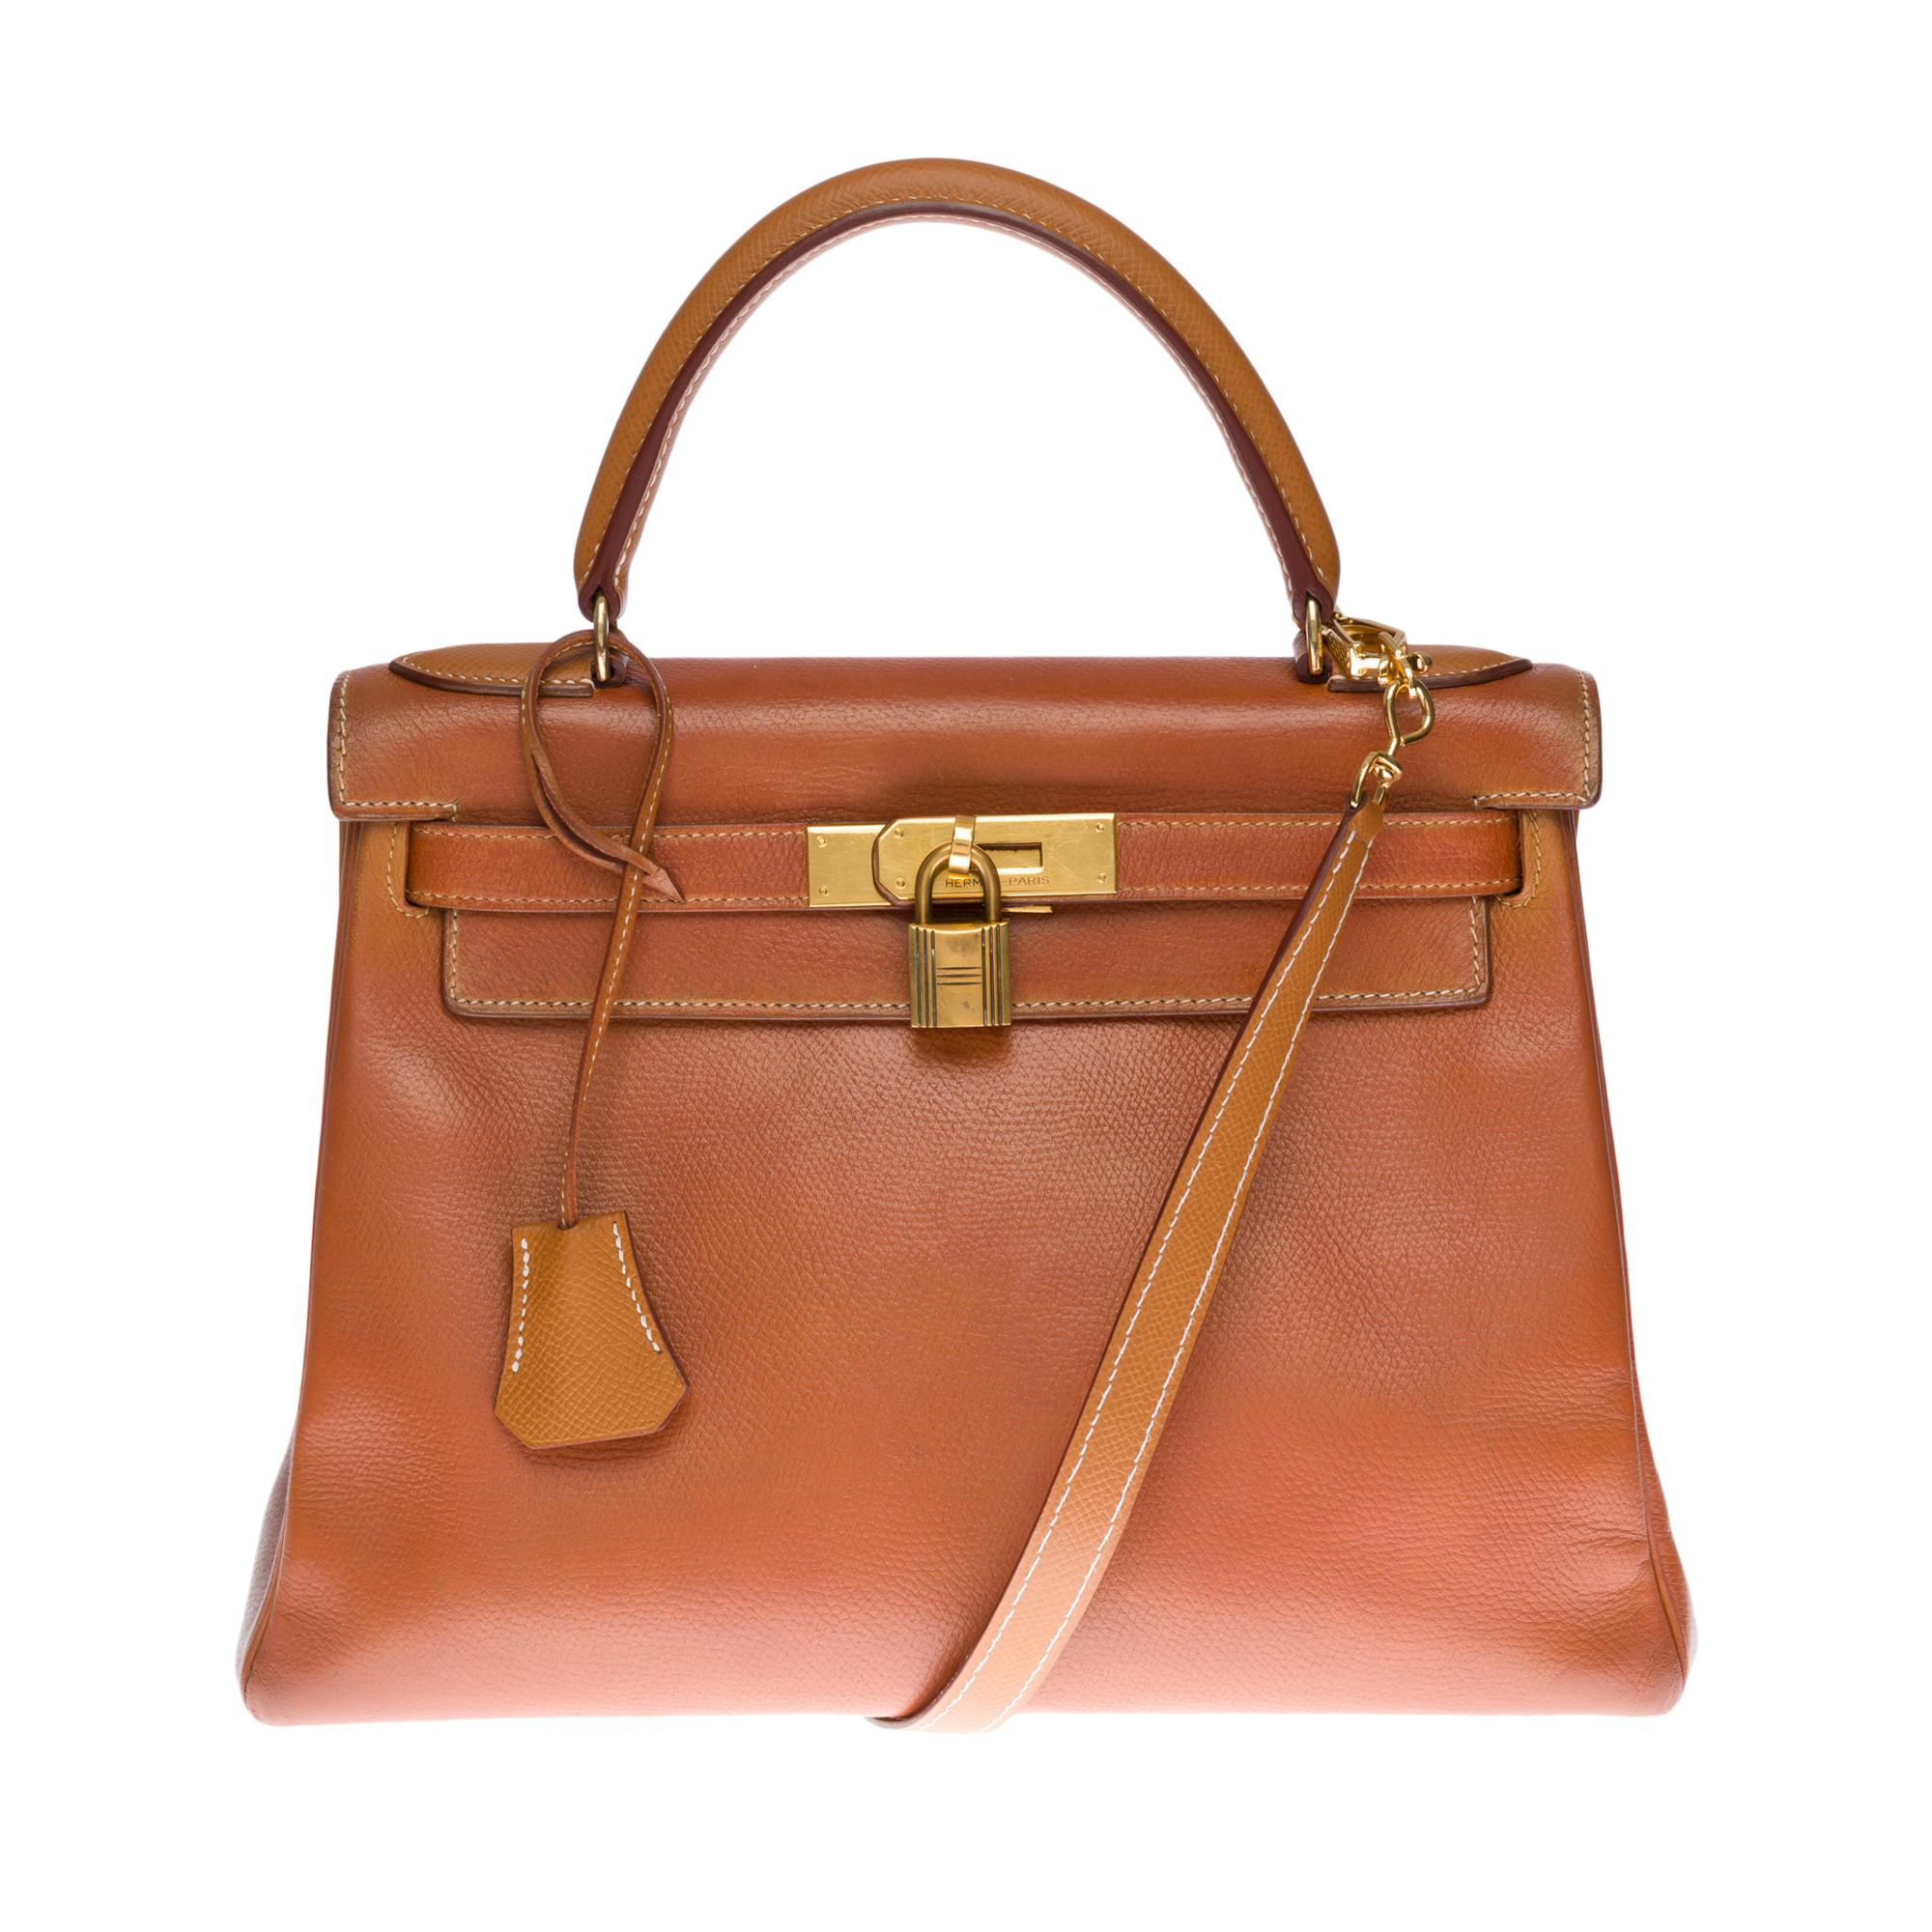 Splendid handbag Hermes Kelly 28 retourné in Courchevel Gold leather, gold plated metal hardware, simple handle in Courchevel leather, shoulder strap in Courchevel gold (not signed Hermès) allowing a hand or shoulder carry

Closure by flap
Inner